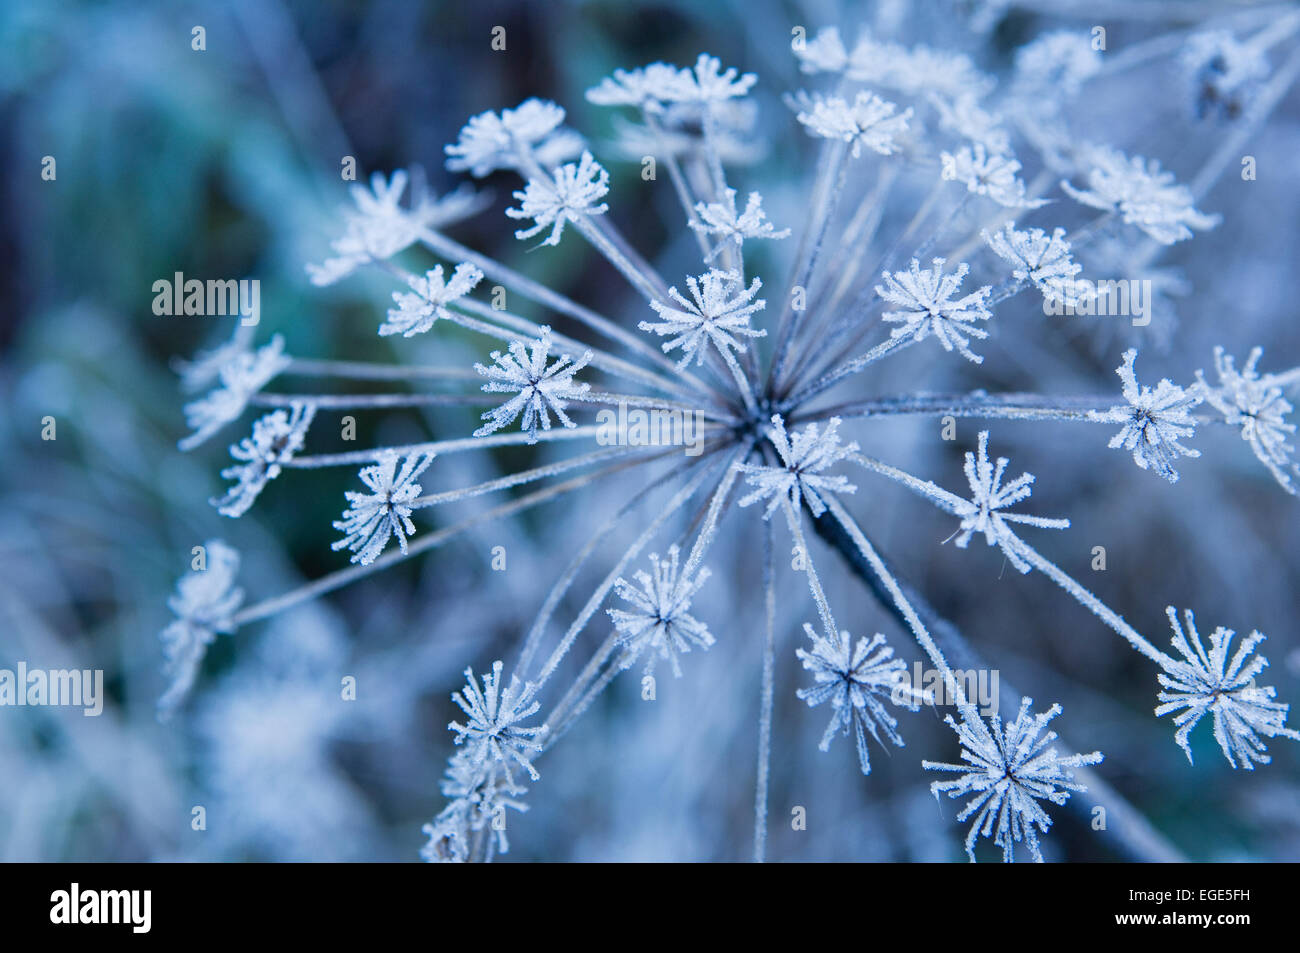 Heavy frost on an Umbellifer plant. Stock Photo